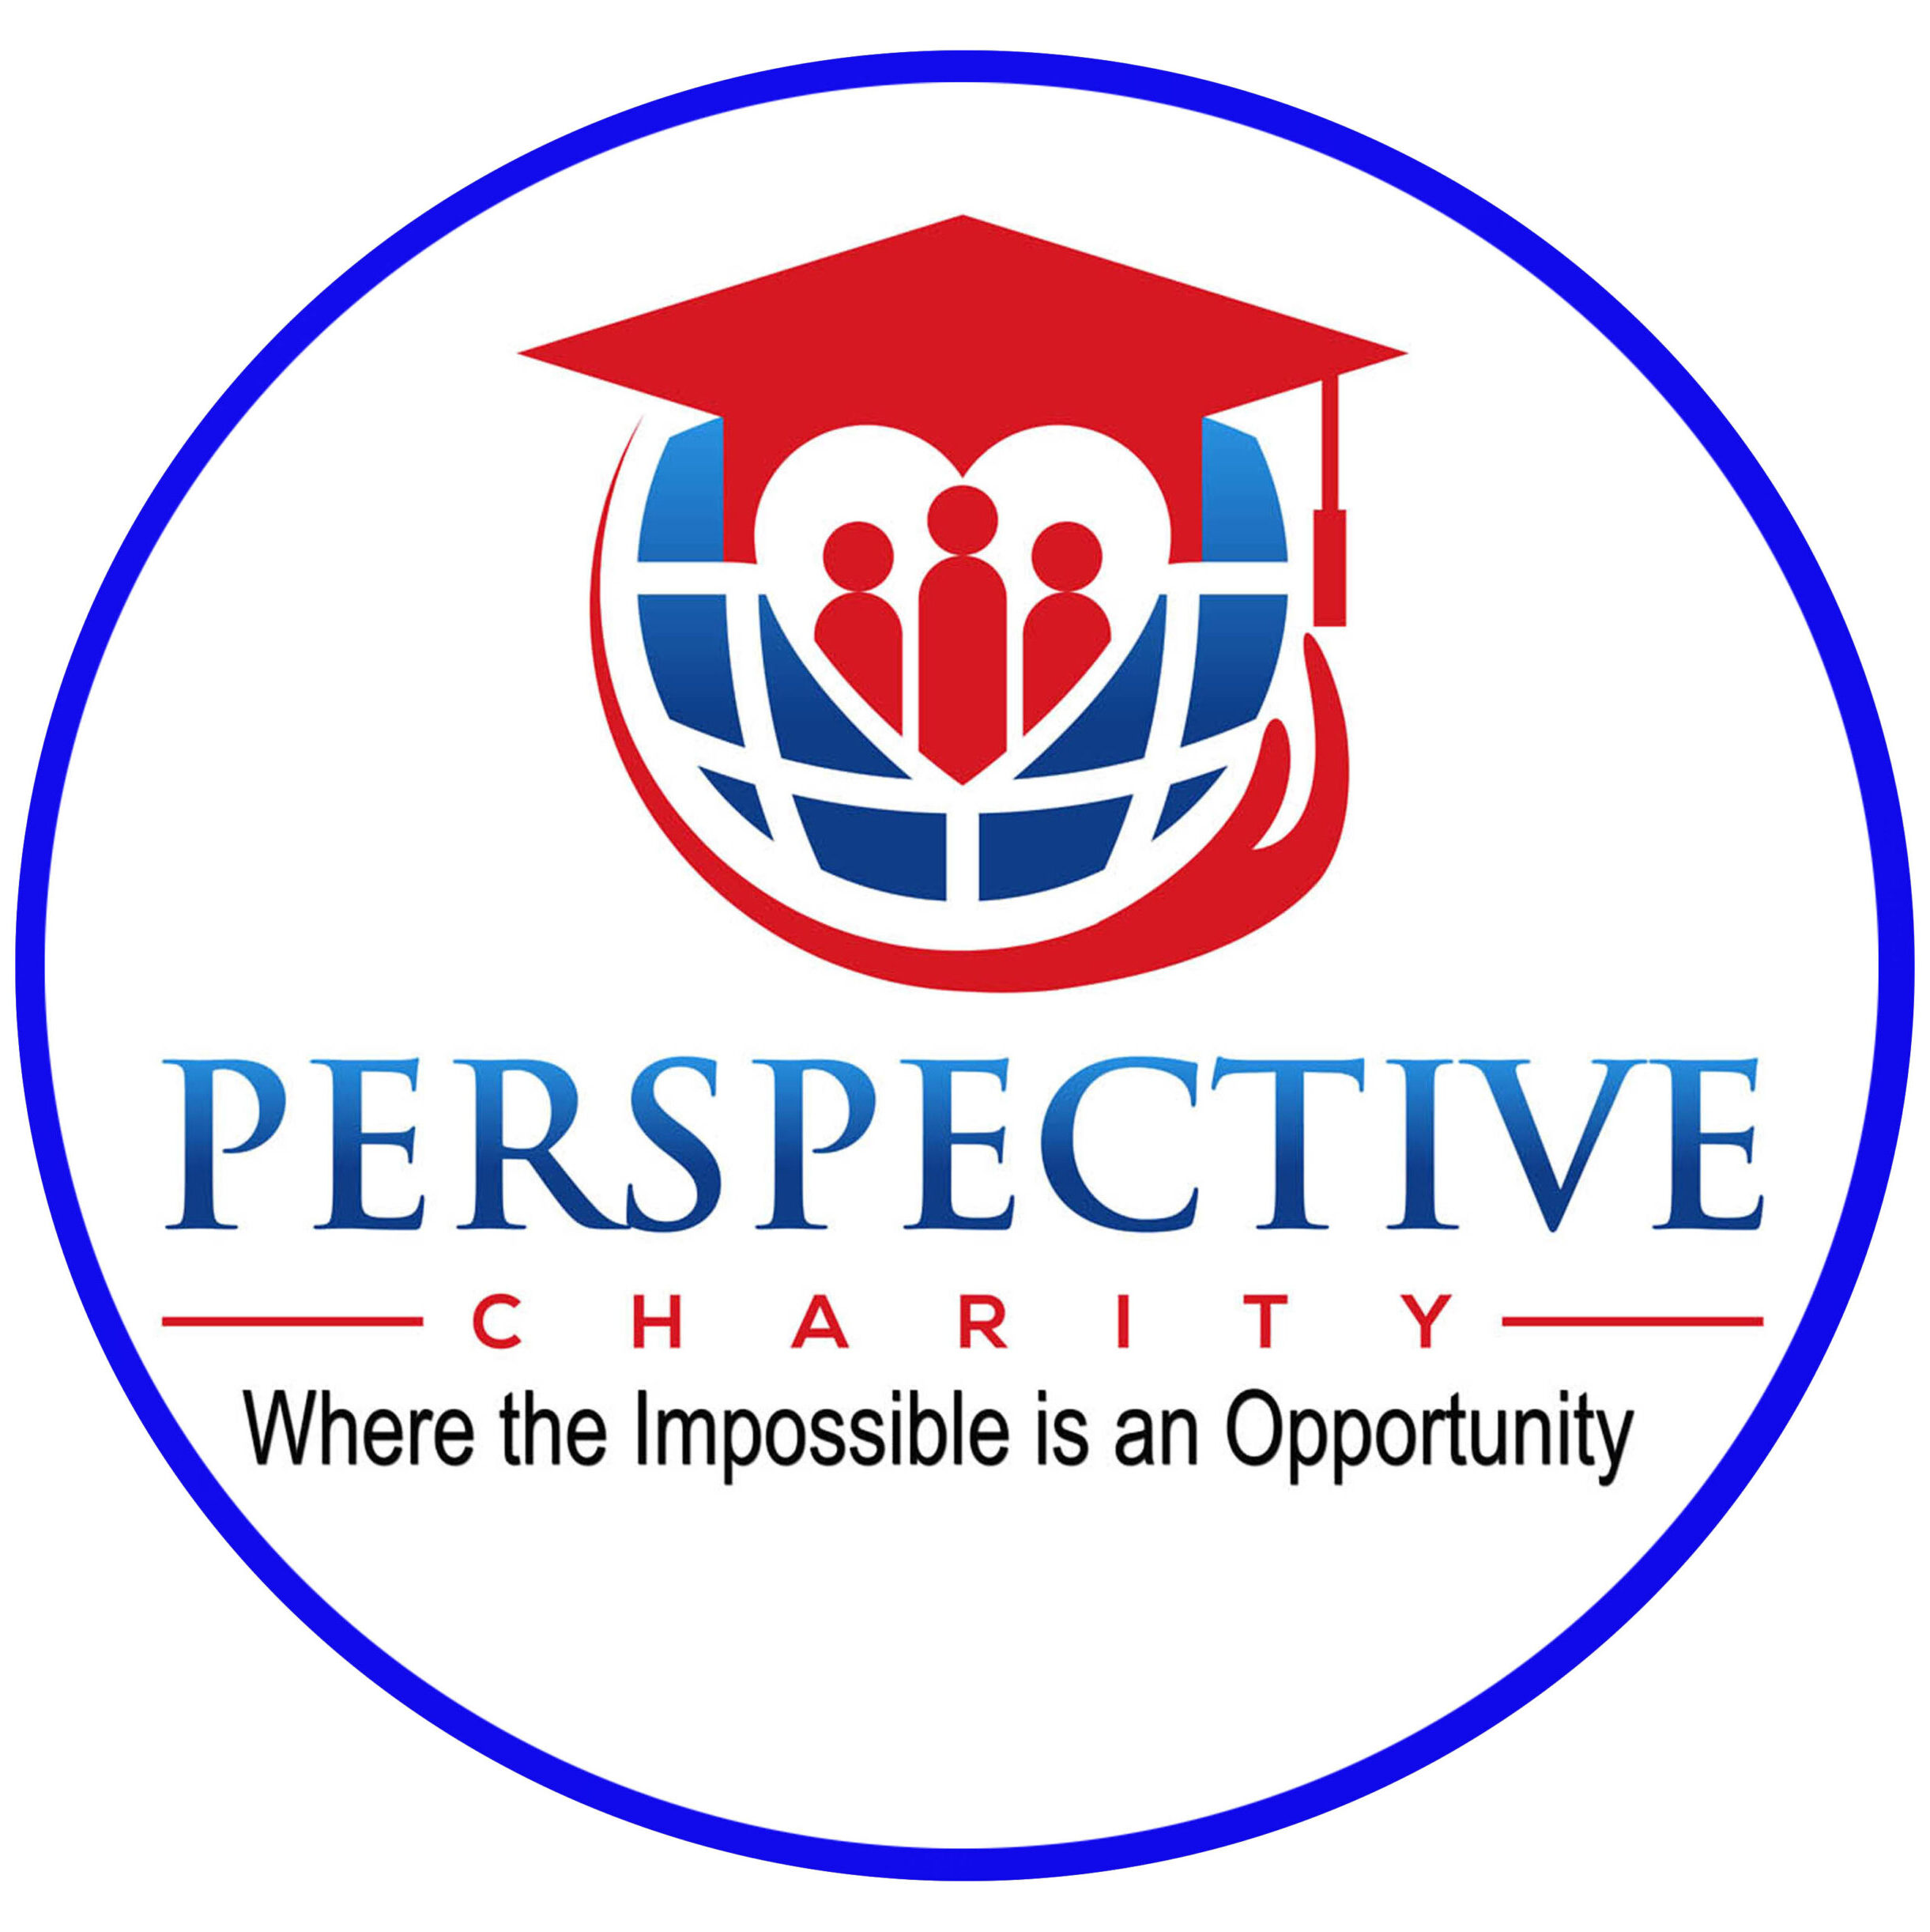 PERSPECTIVE CHARITY